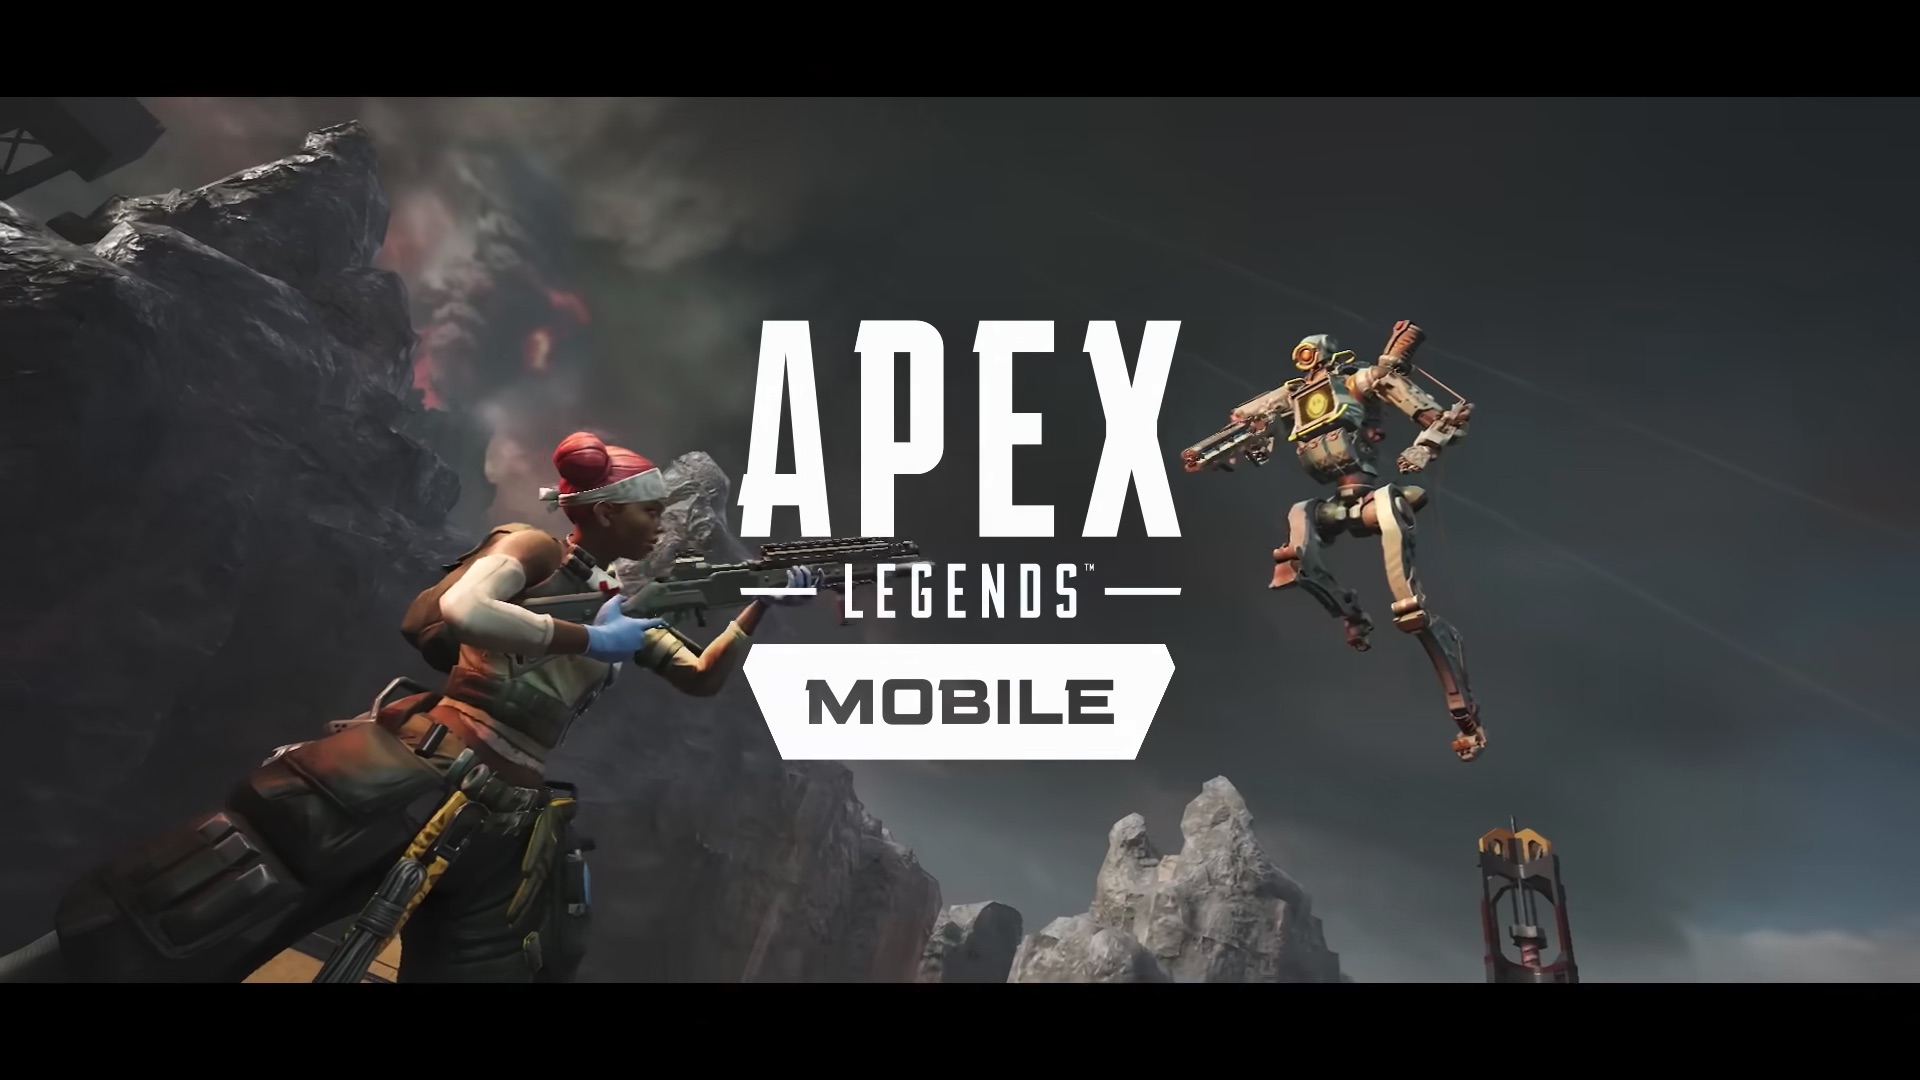 Apex Legends Mobile Launch: What You Need To Know